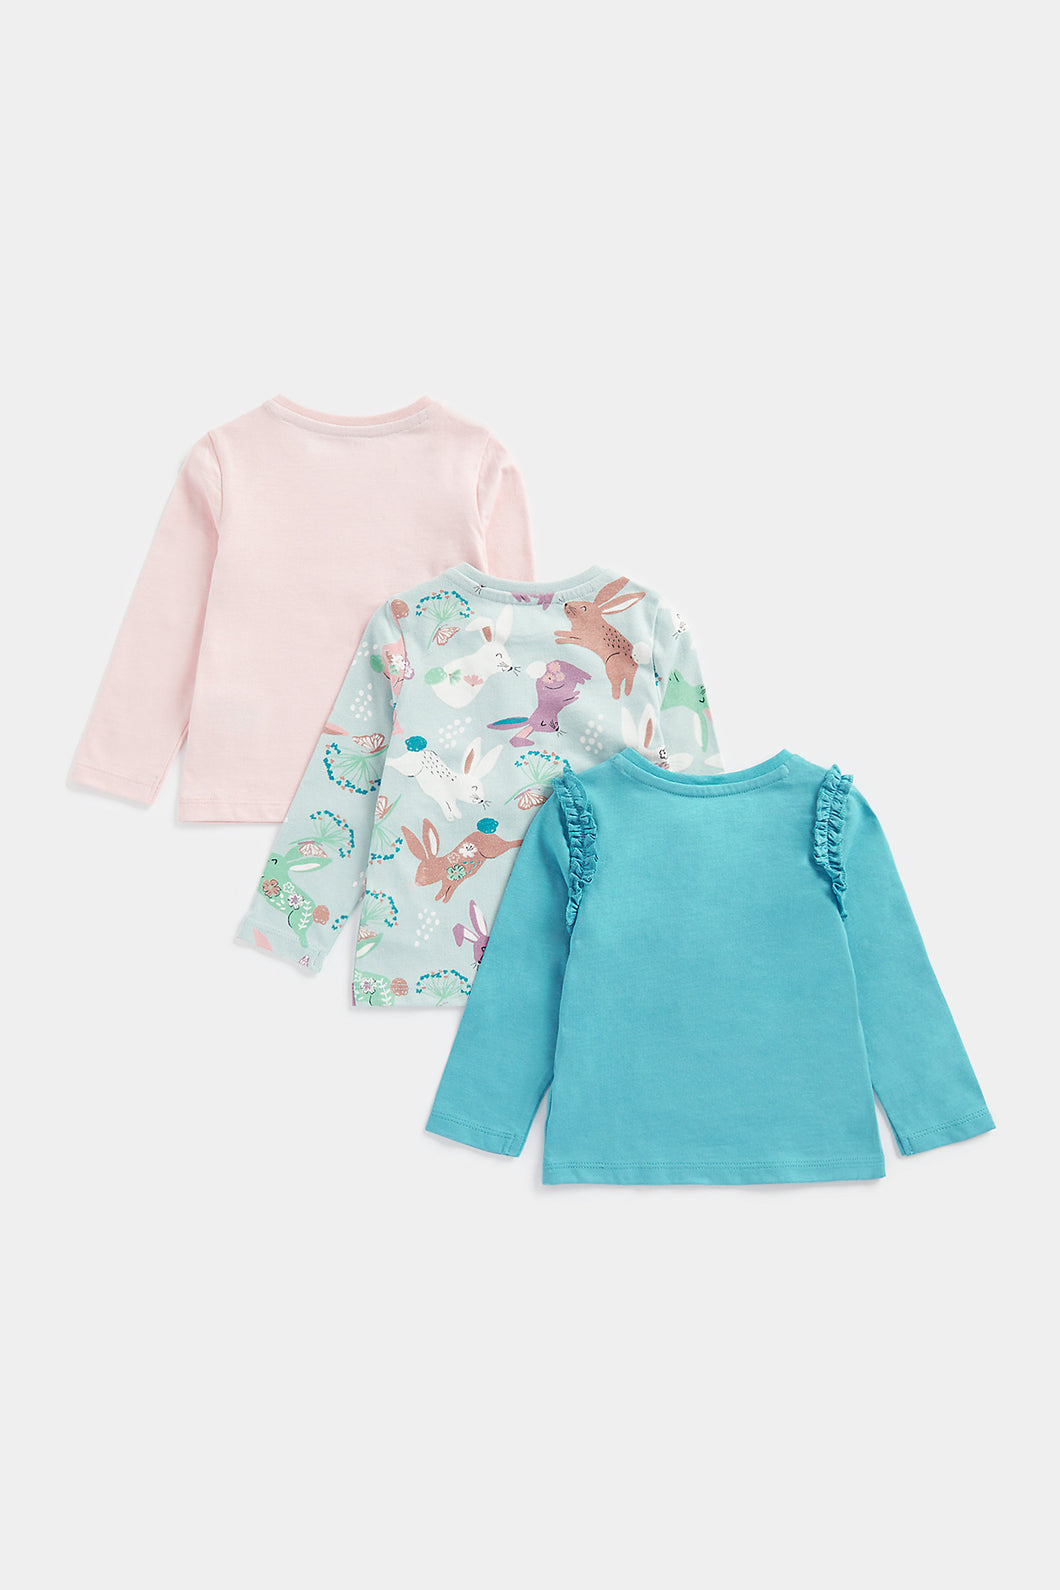 Mothercare Nature Long-Sleeved T-Shirts - 3 Pack